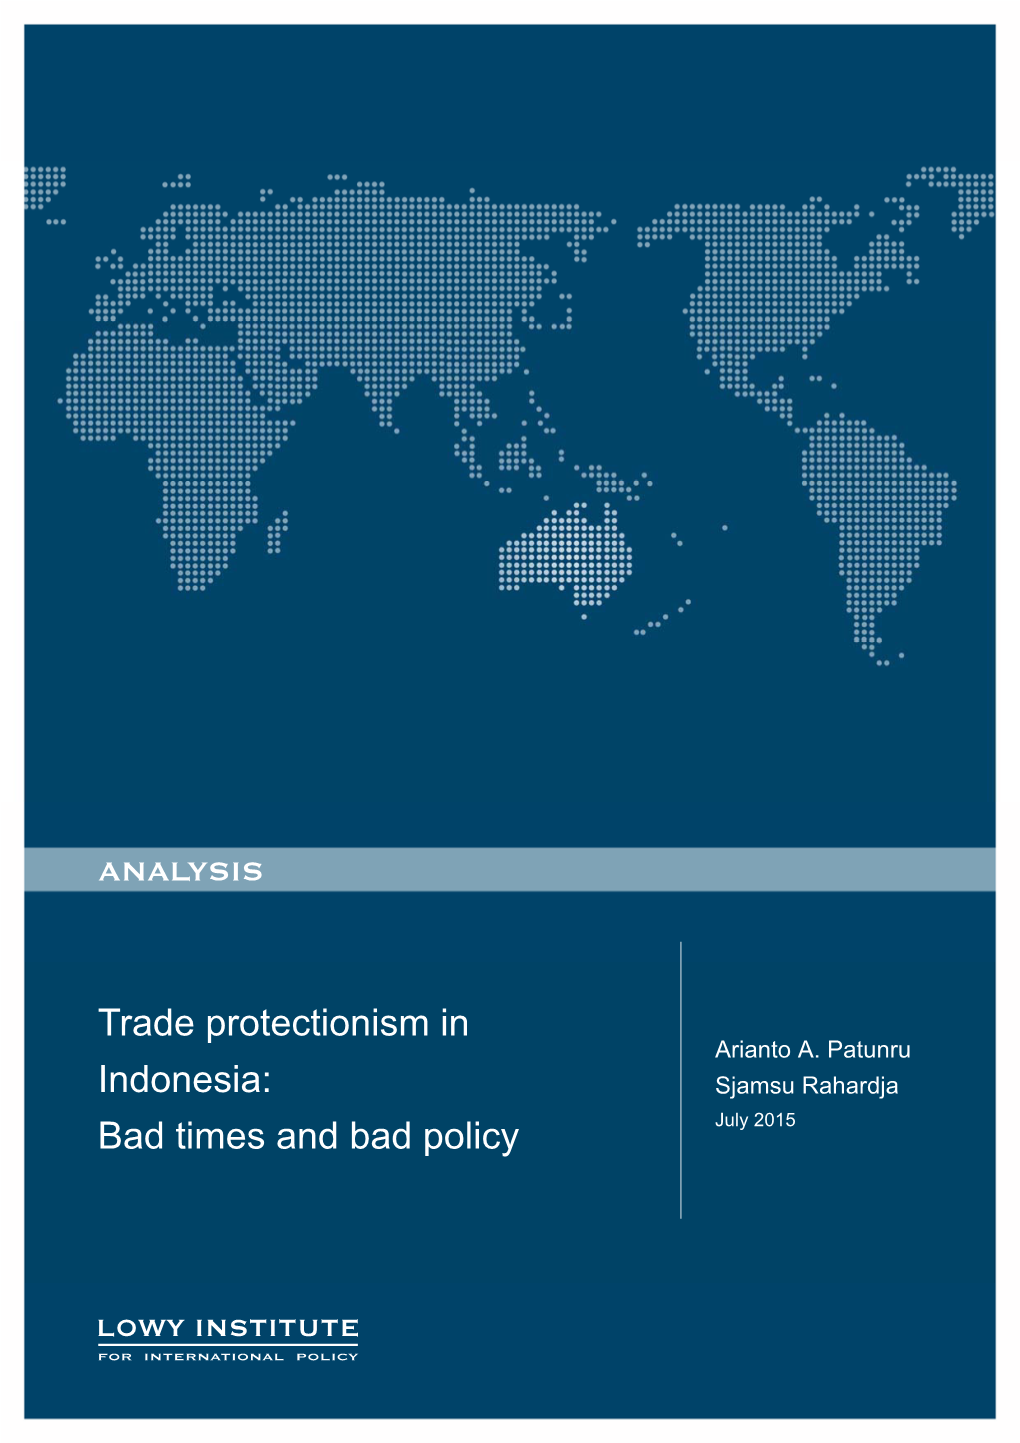 Trade Protectionism in Indonesia: Bad Times and Bad Policy